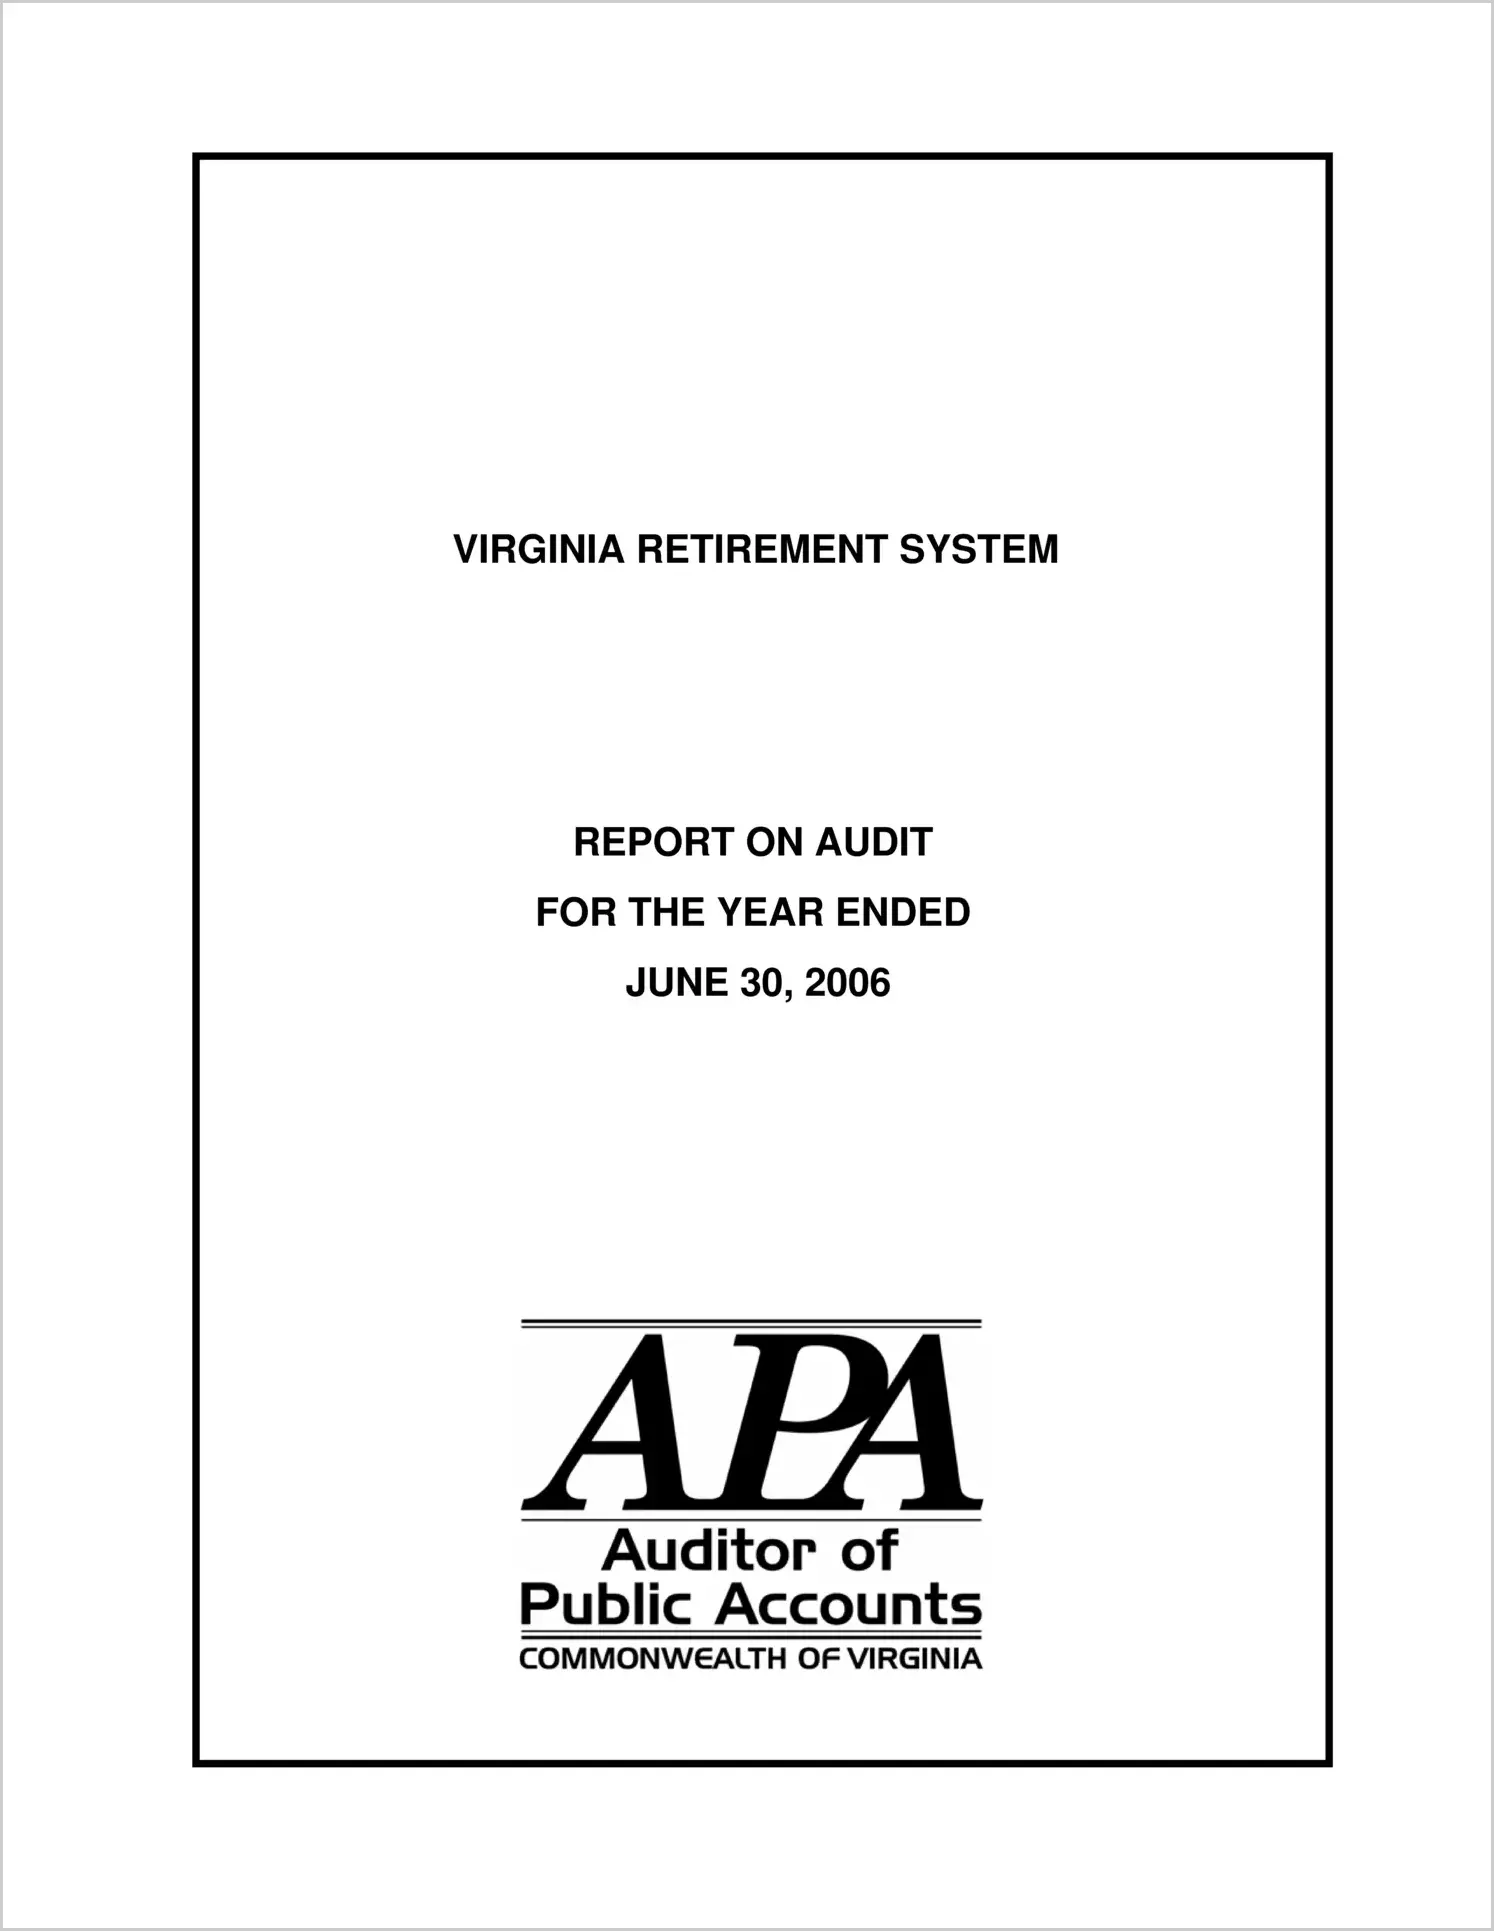 Virginia Retirement System for the year ended June 30, 2006